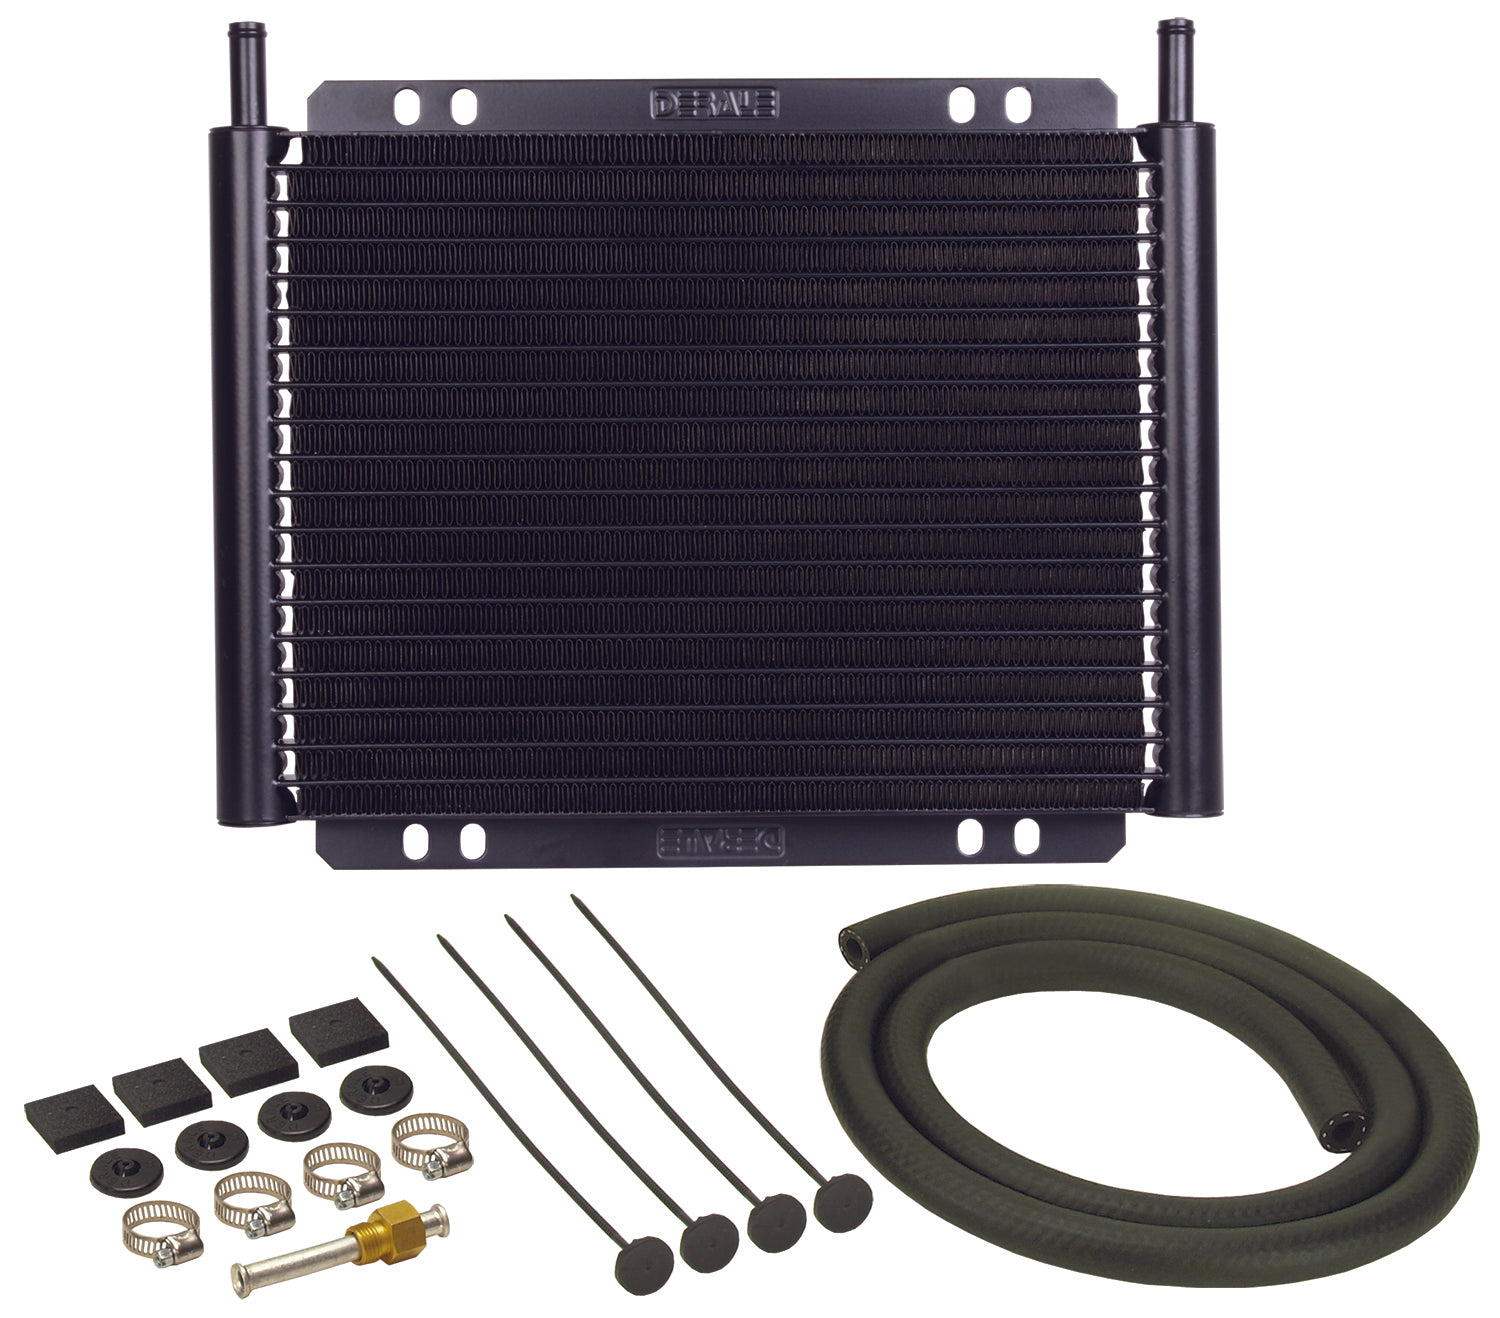 19 Row Series 8000 Plate & Fin Transmission Cooler Kit, 11/32"